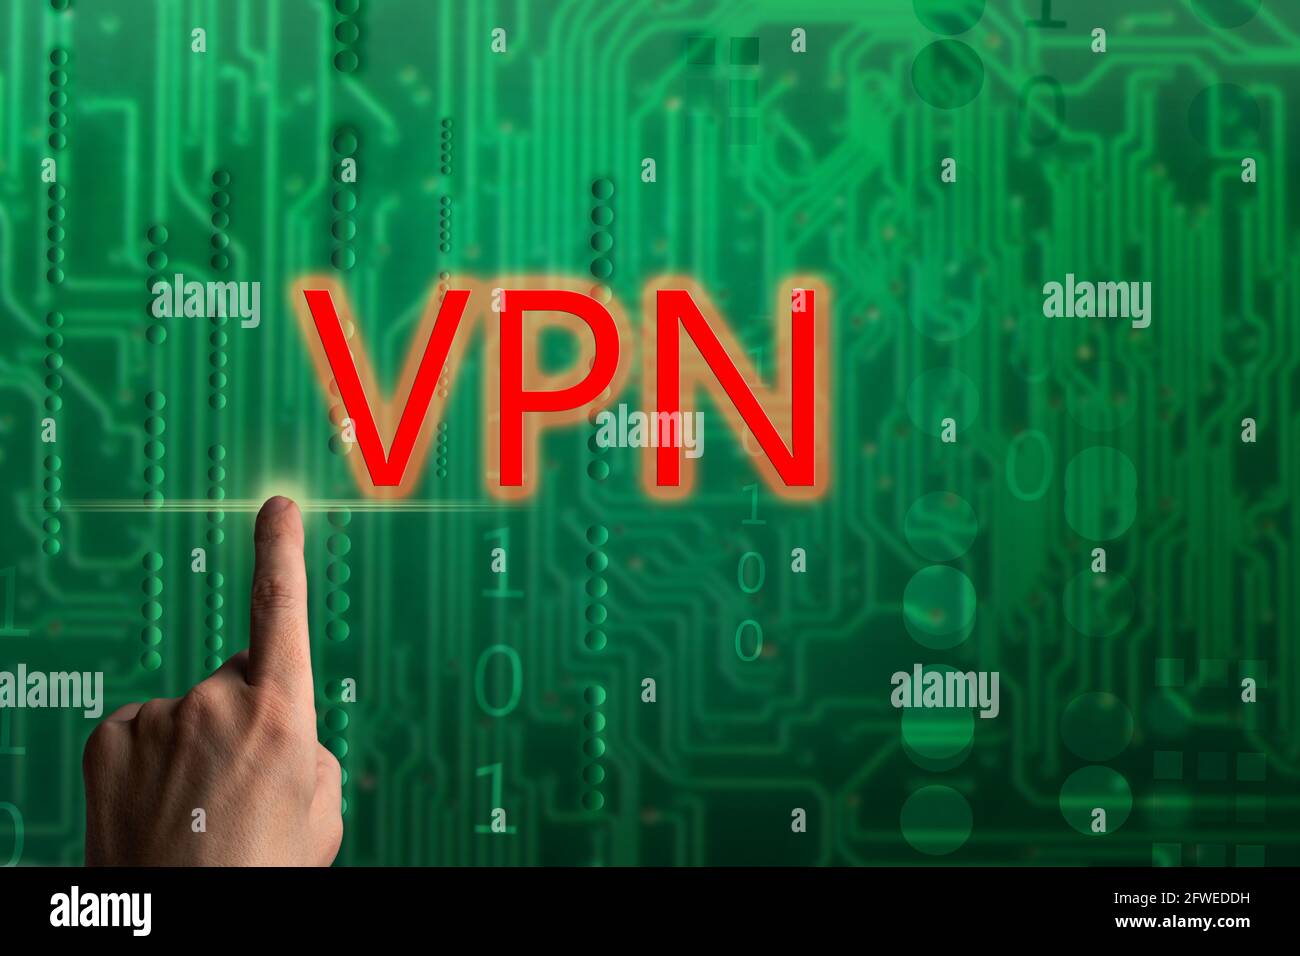 Man using hacking vpn. Data thief, internet fraud, dark web and cyber security concept Stock Photo